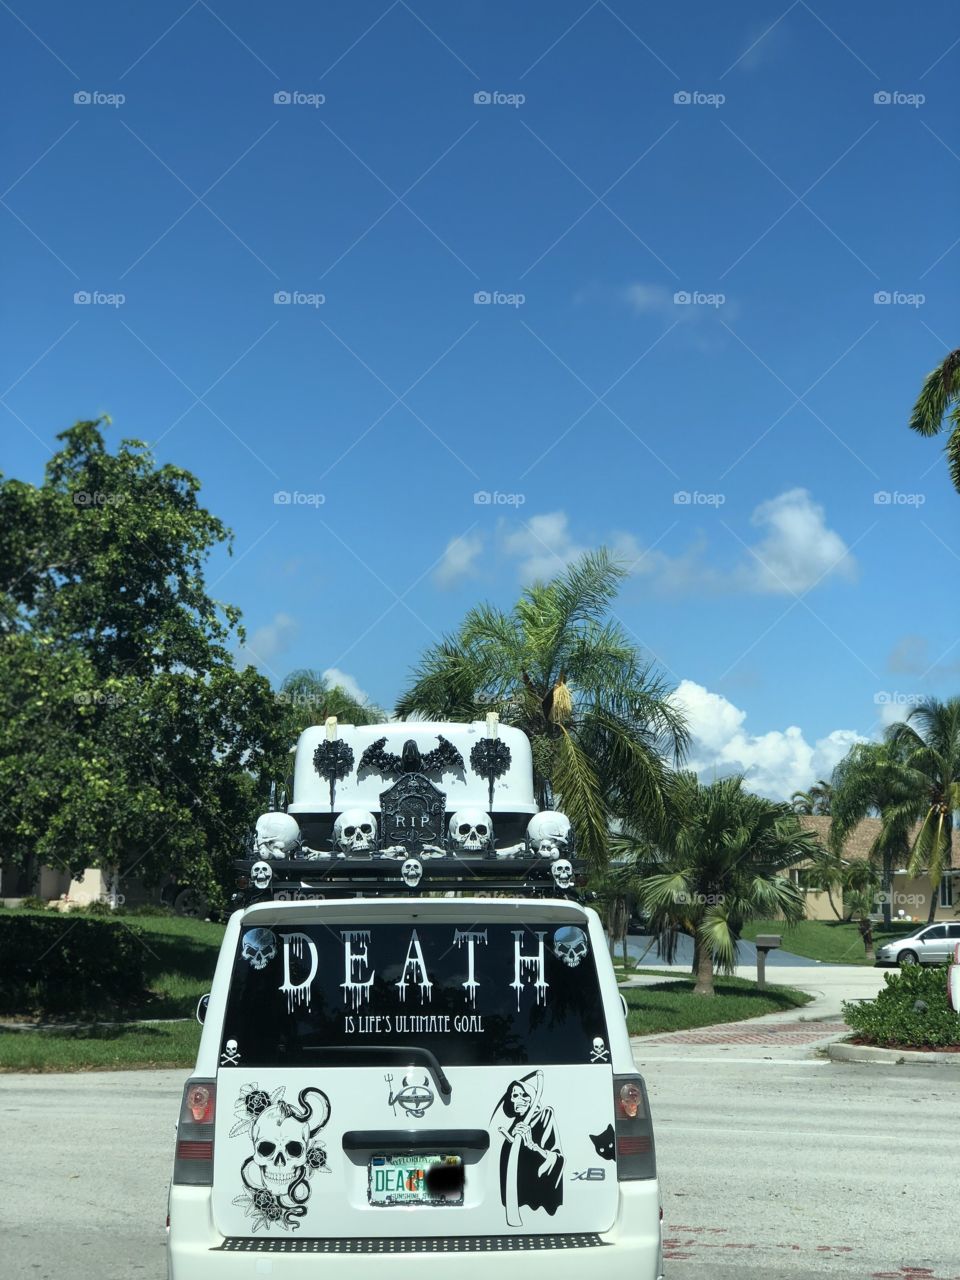 Death is a fascination for this SUV owner. Is it just for Halloween or all year through?